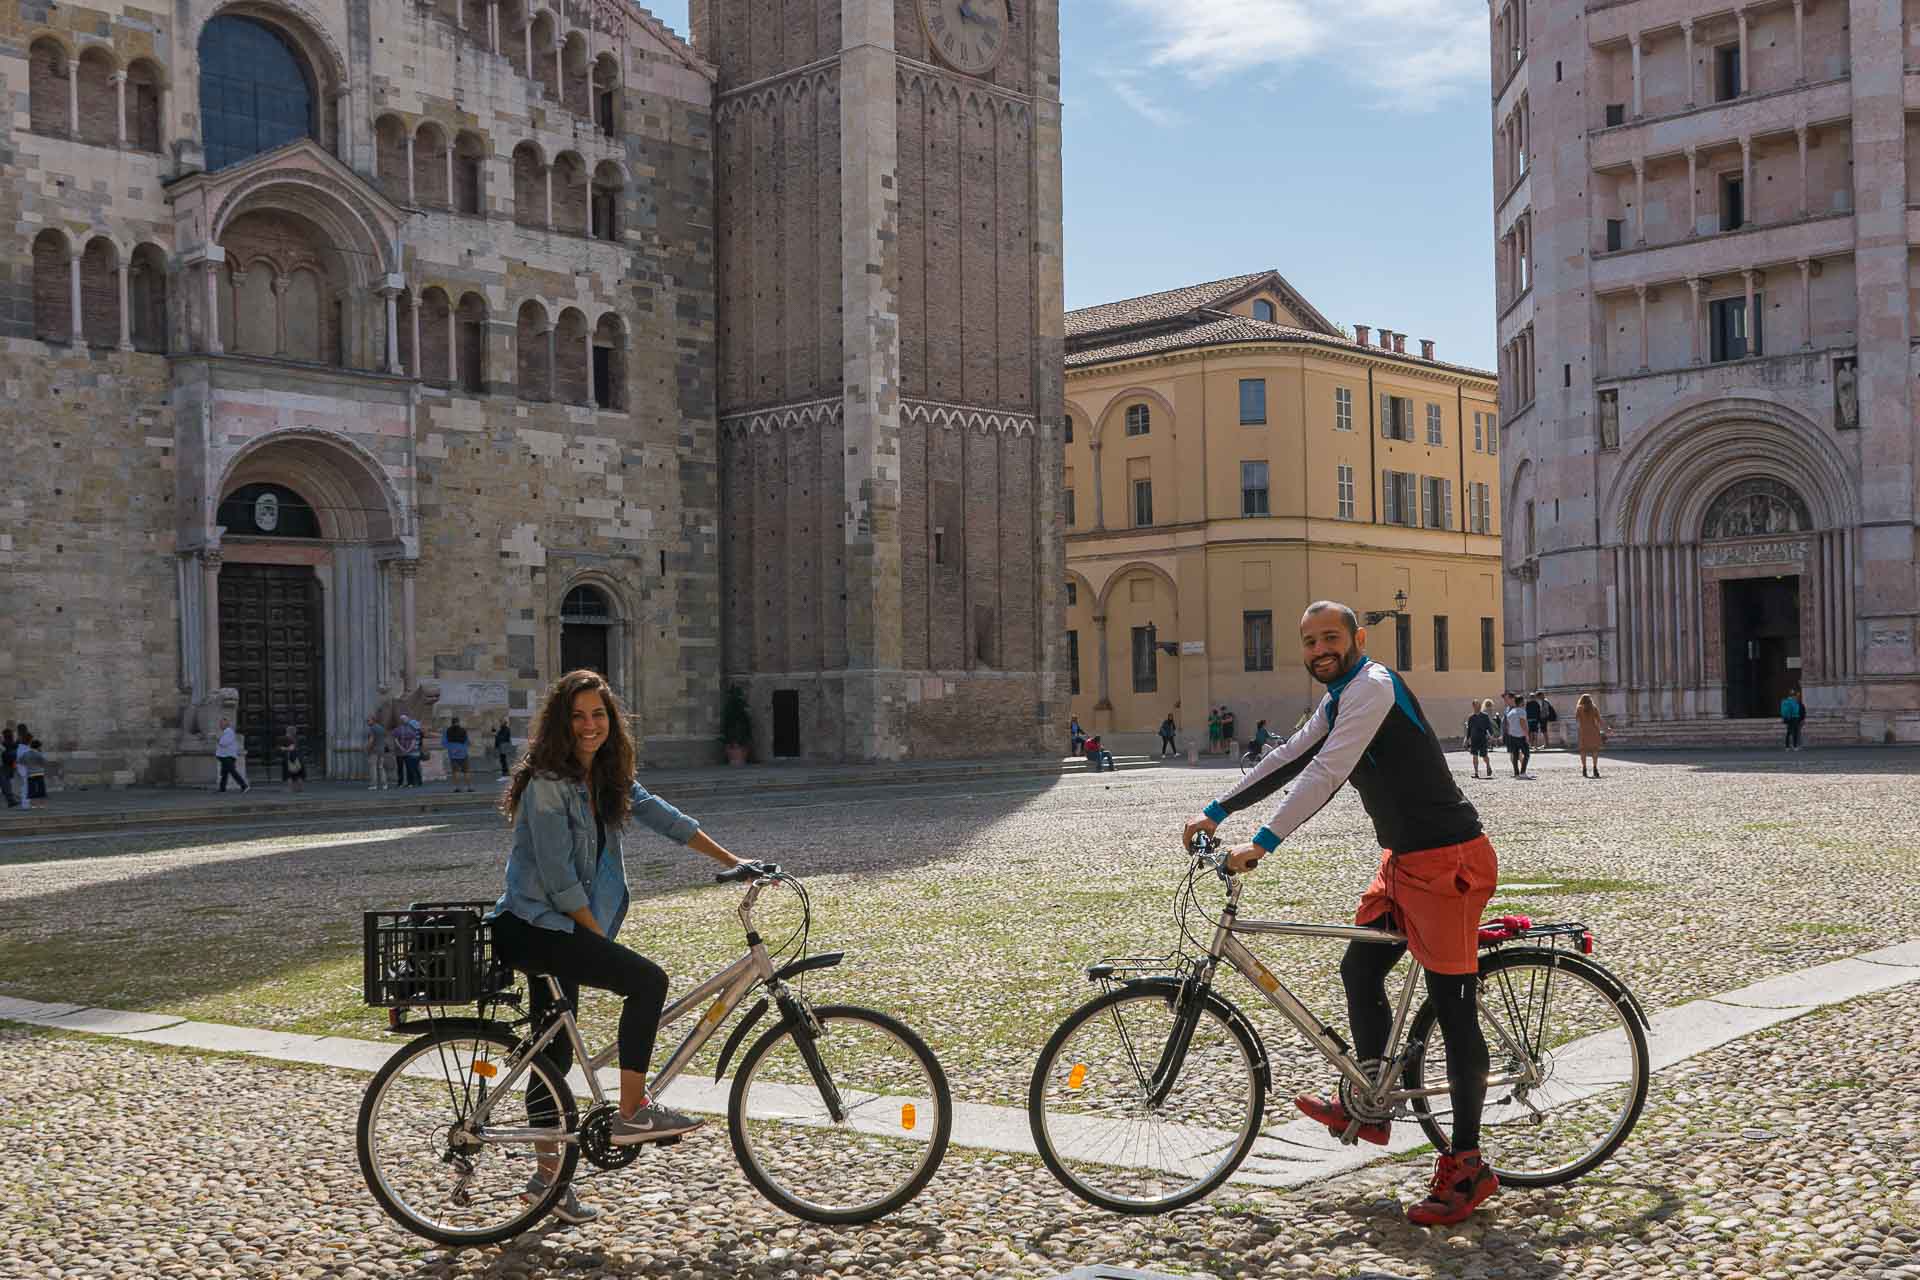 Tiago and Fernanda posing with their bike in front of the main cathedral of Parma